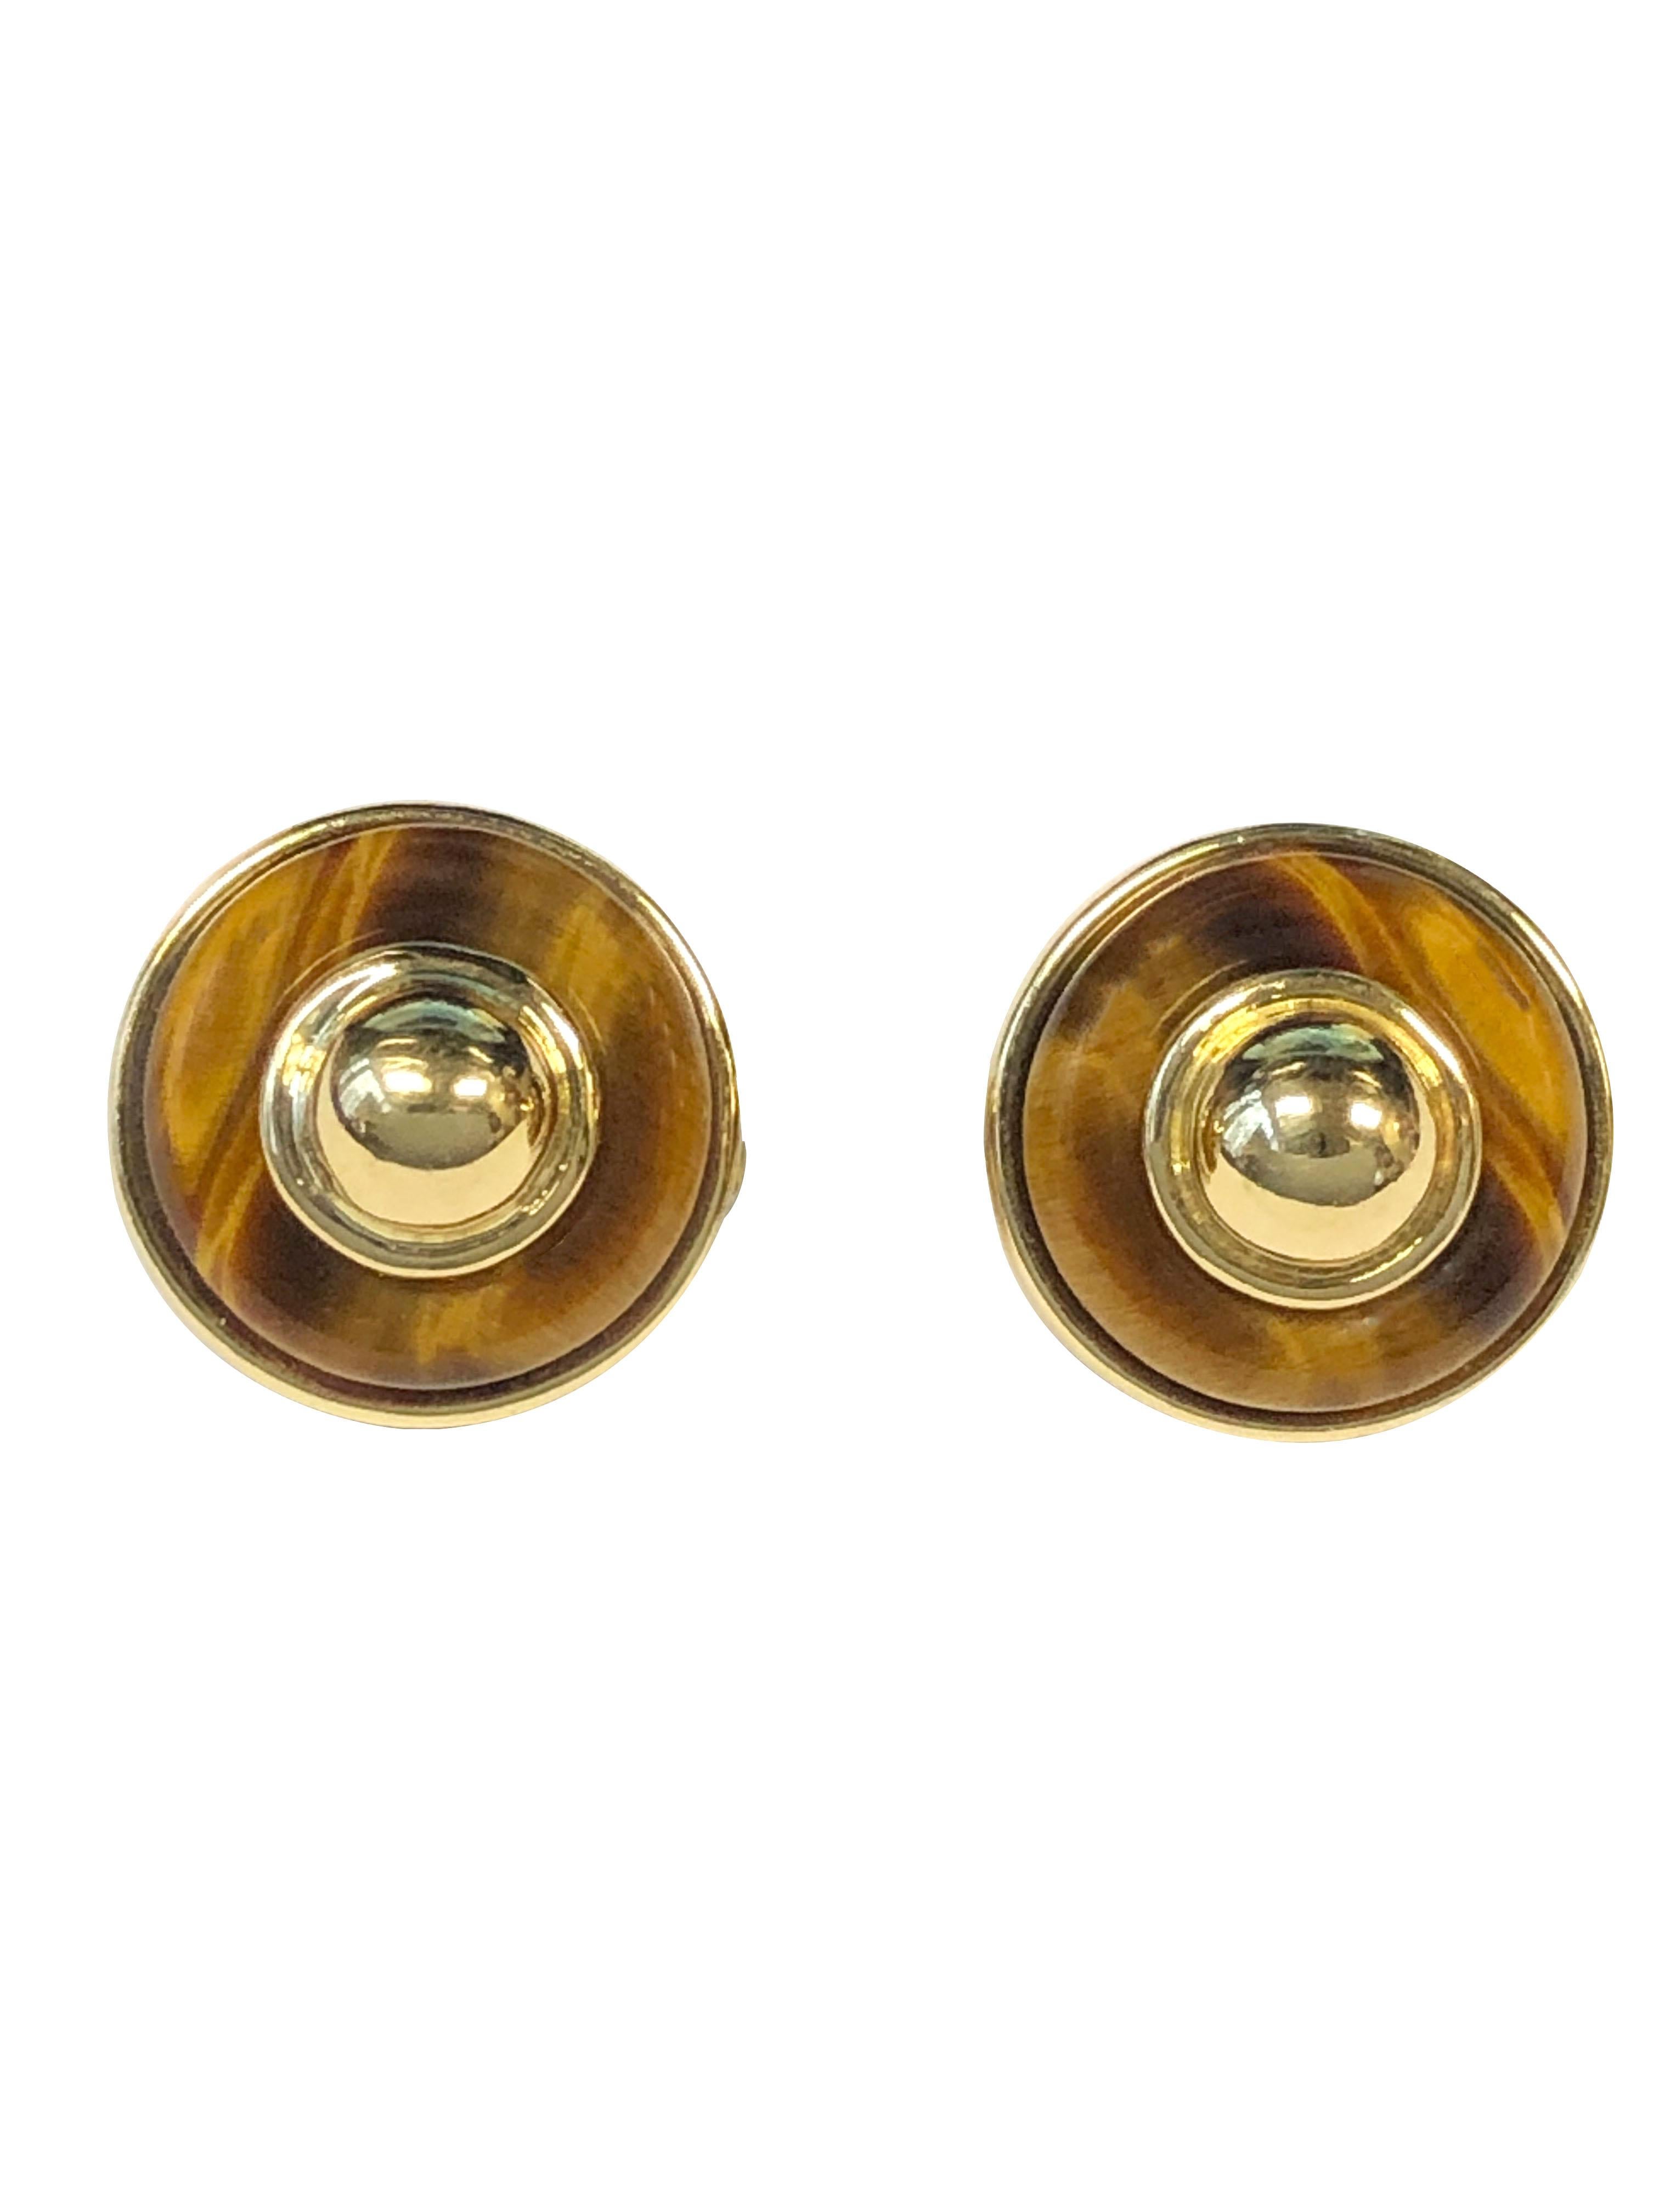 Circa 1980s Tiffany & Company 18k Yellow Gold and Tigers Eye Earrings, measuring 3/4 inch in diameter X 1/2 inch, Clip backs to which a post can be easily added if desired.  Livré dans sa boîte de présentation d'origine.